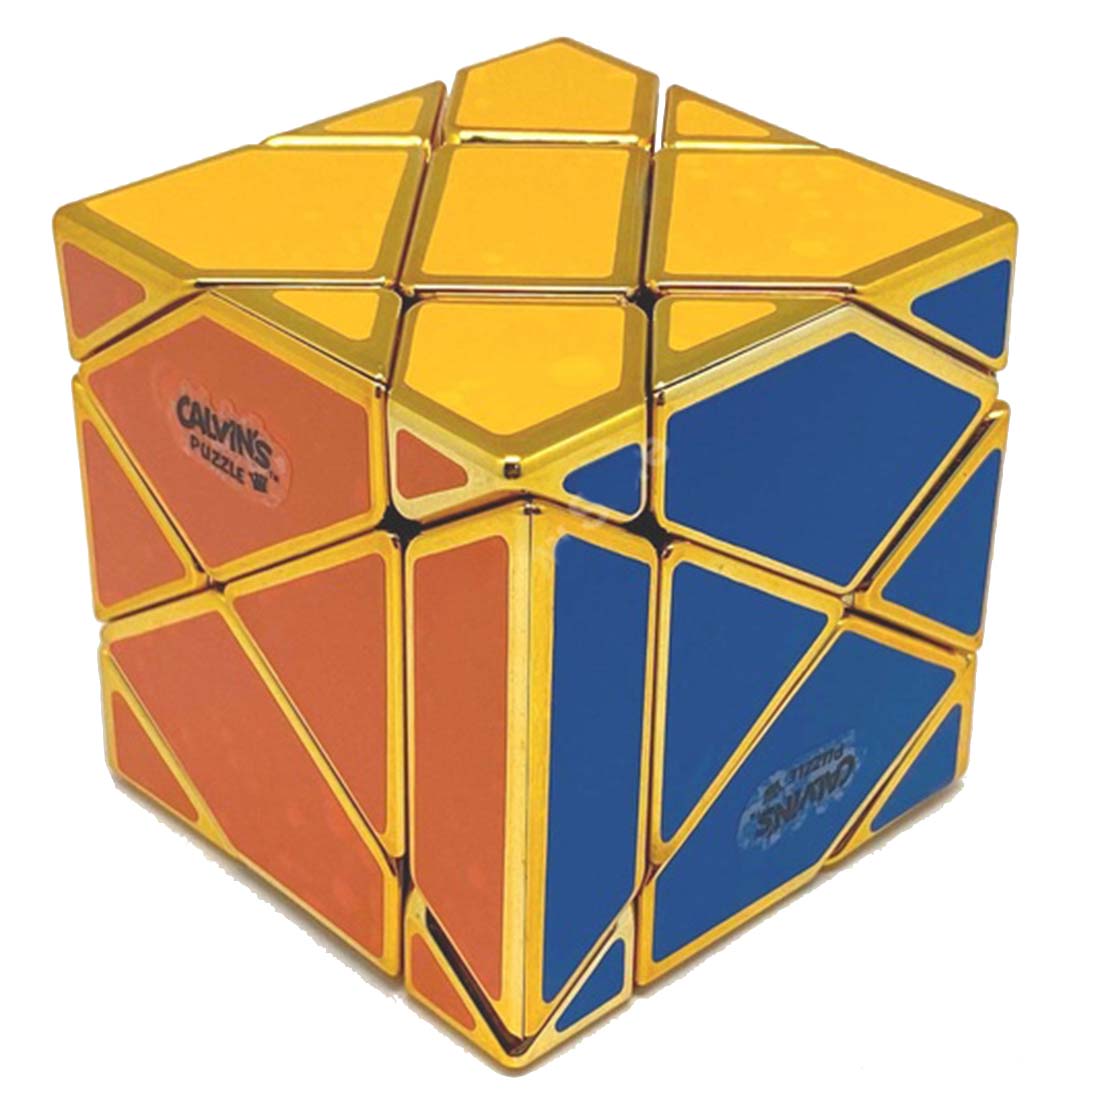 Calvin's Super Fisher 3x3 Speed Cube with 6-Color Stickers (Golden/Limited Edition)